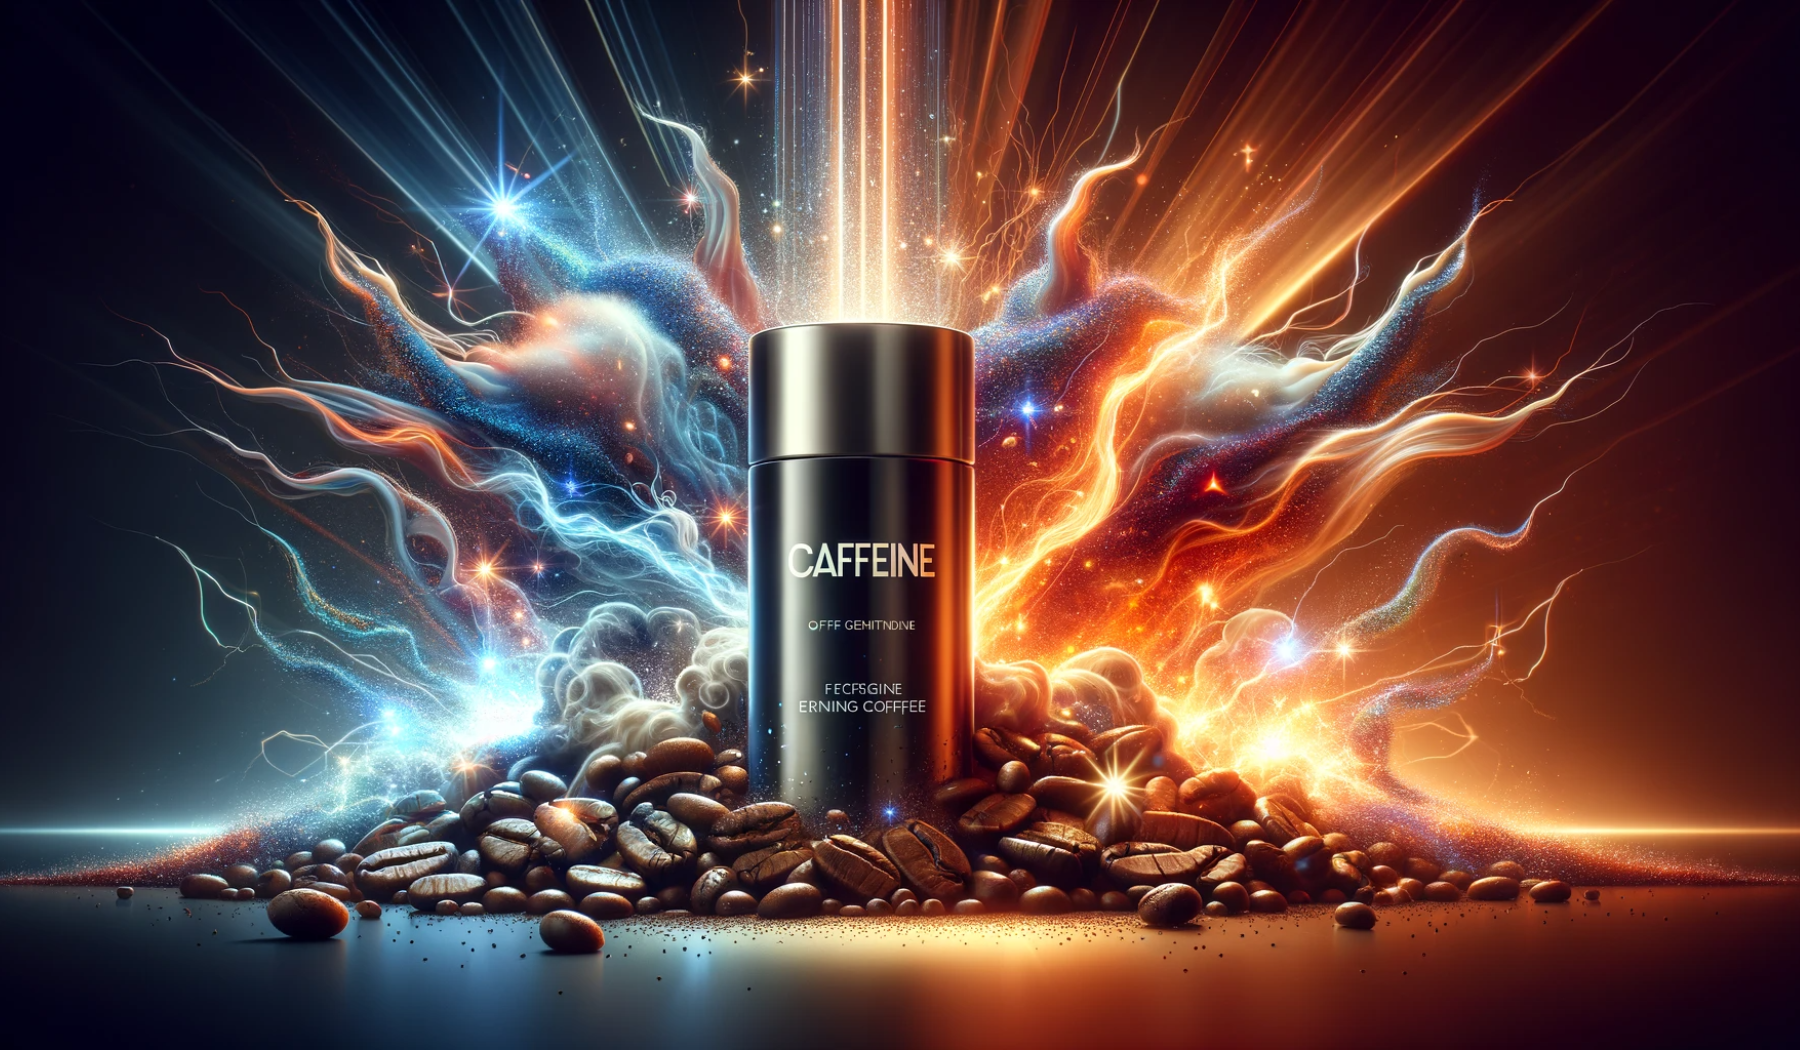 Caffeine: Energizing Your Skin for a Vibrant Complexion